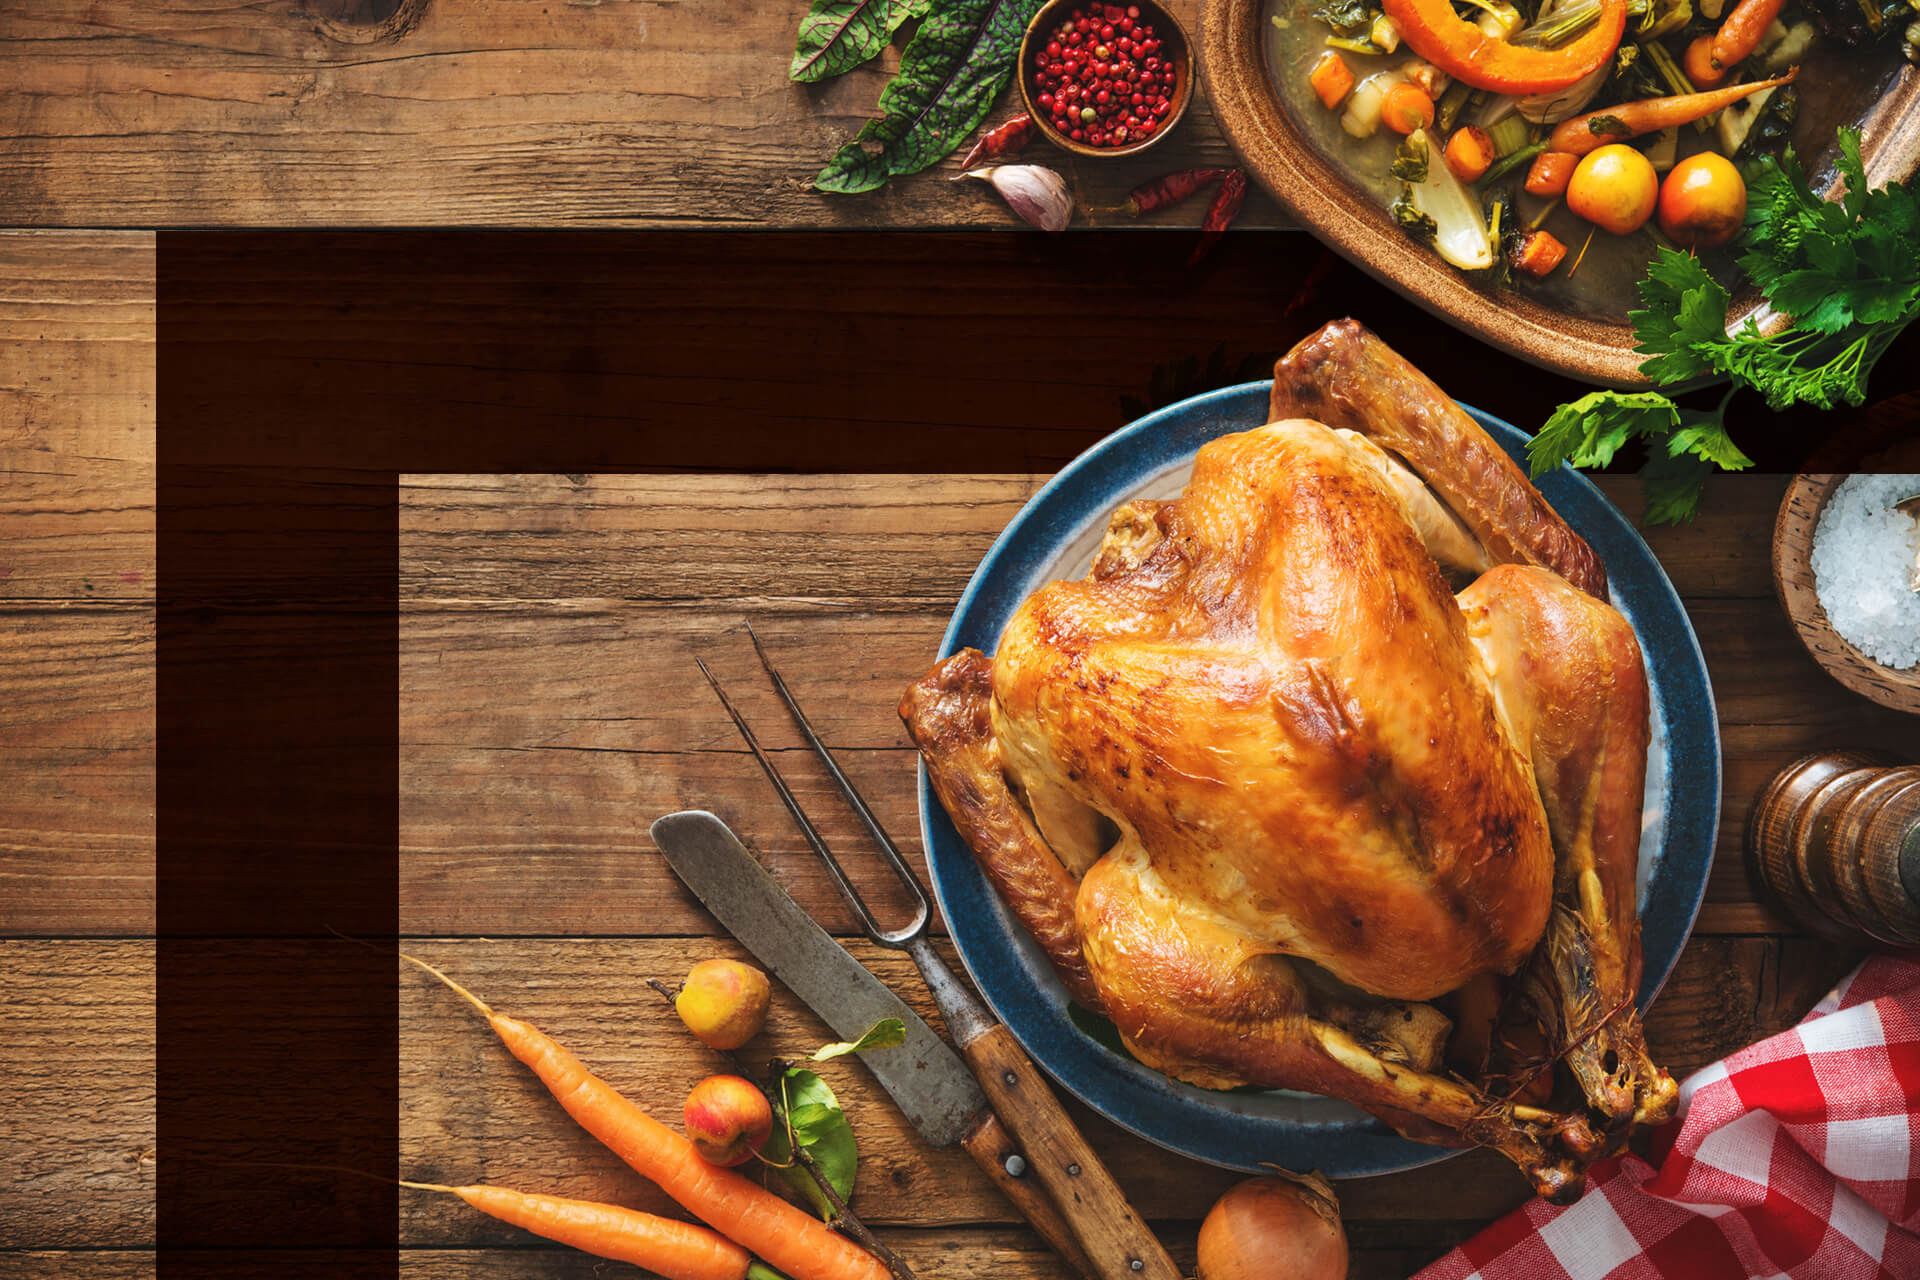 Feature-your-guide-to-hosting-thanksgiving-in-a-small-house